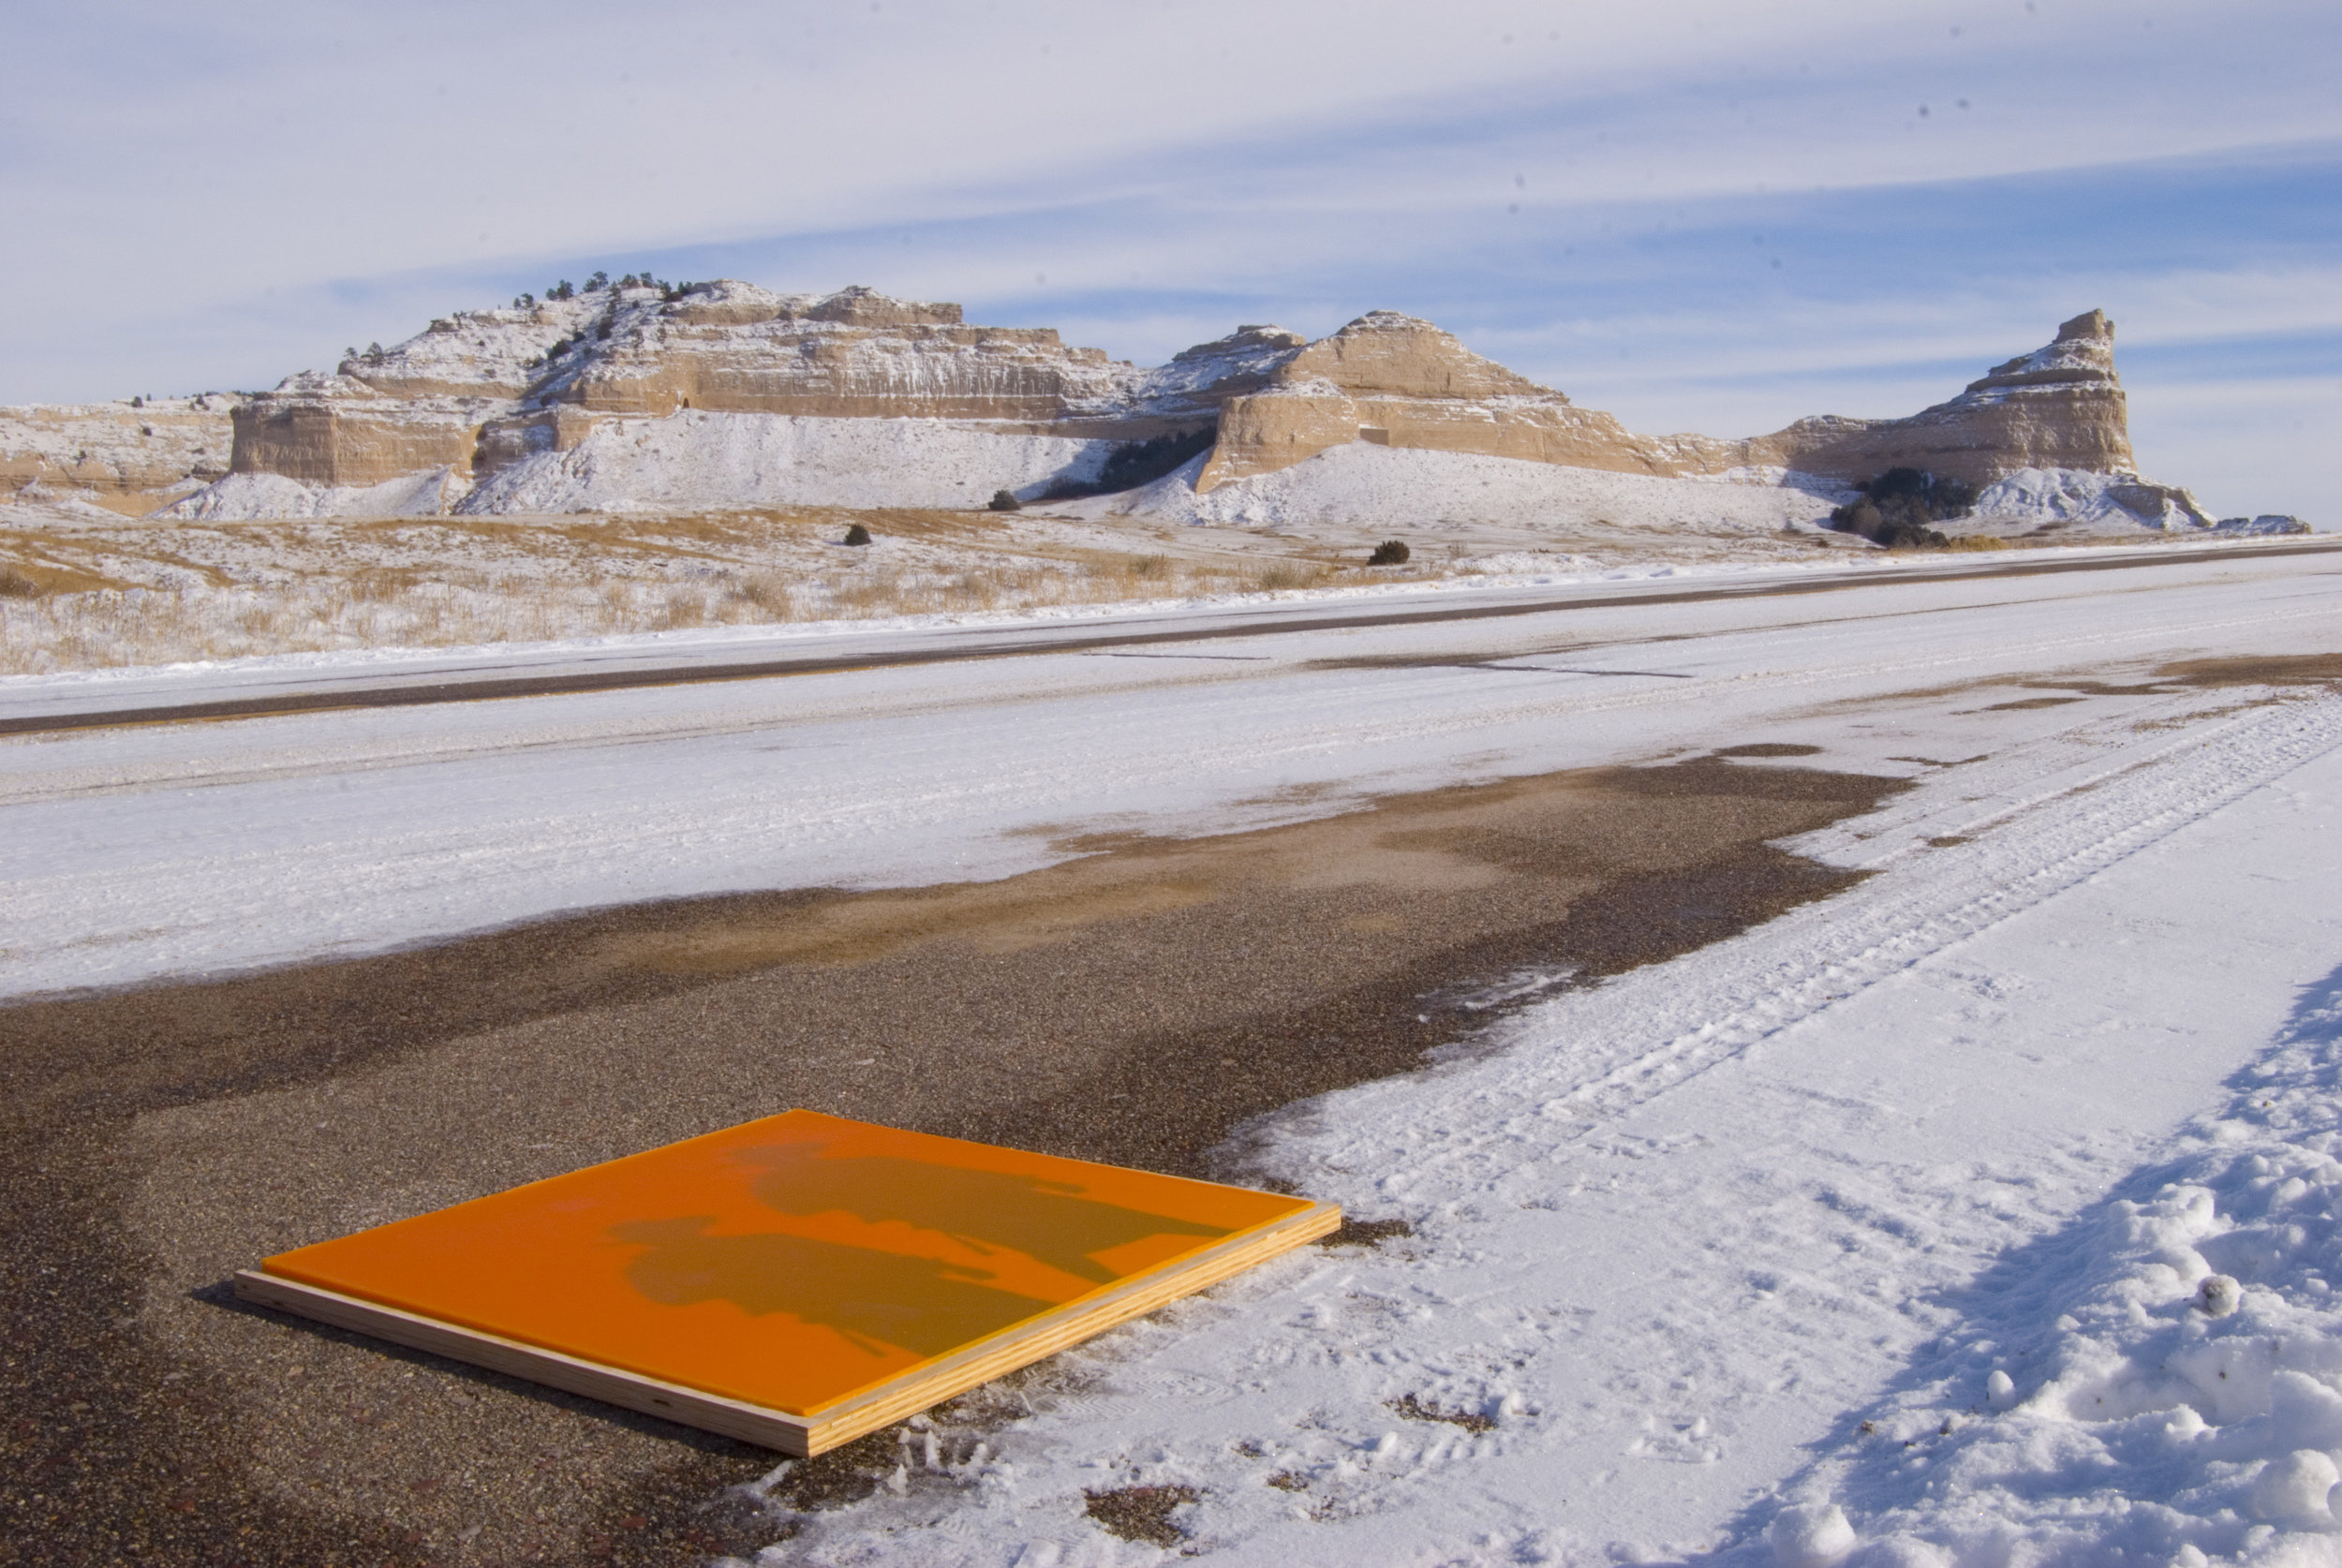 50 STATES WYOMING_Nick Vaughan and Jake Margolin_Wax panel in the snow at Scotts Bluff.jpg